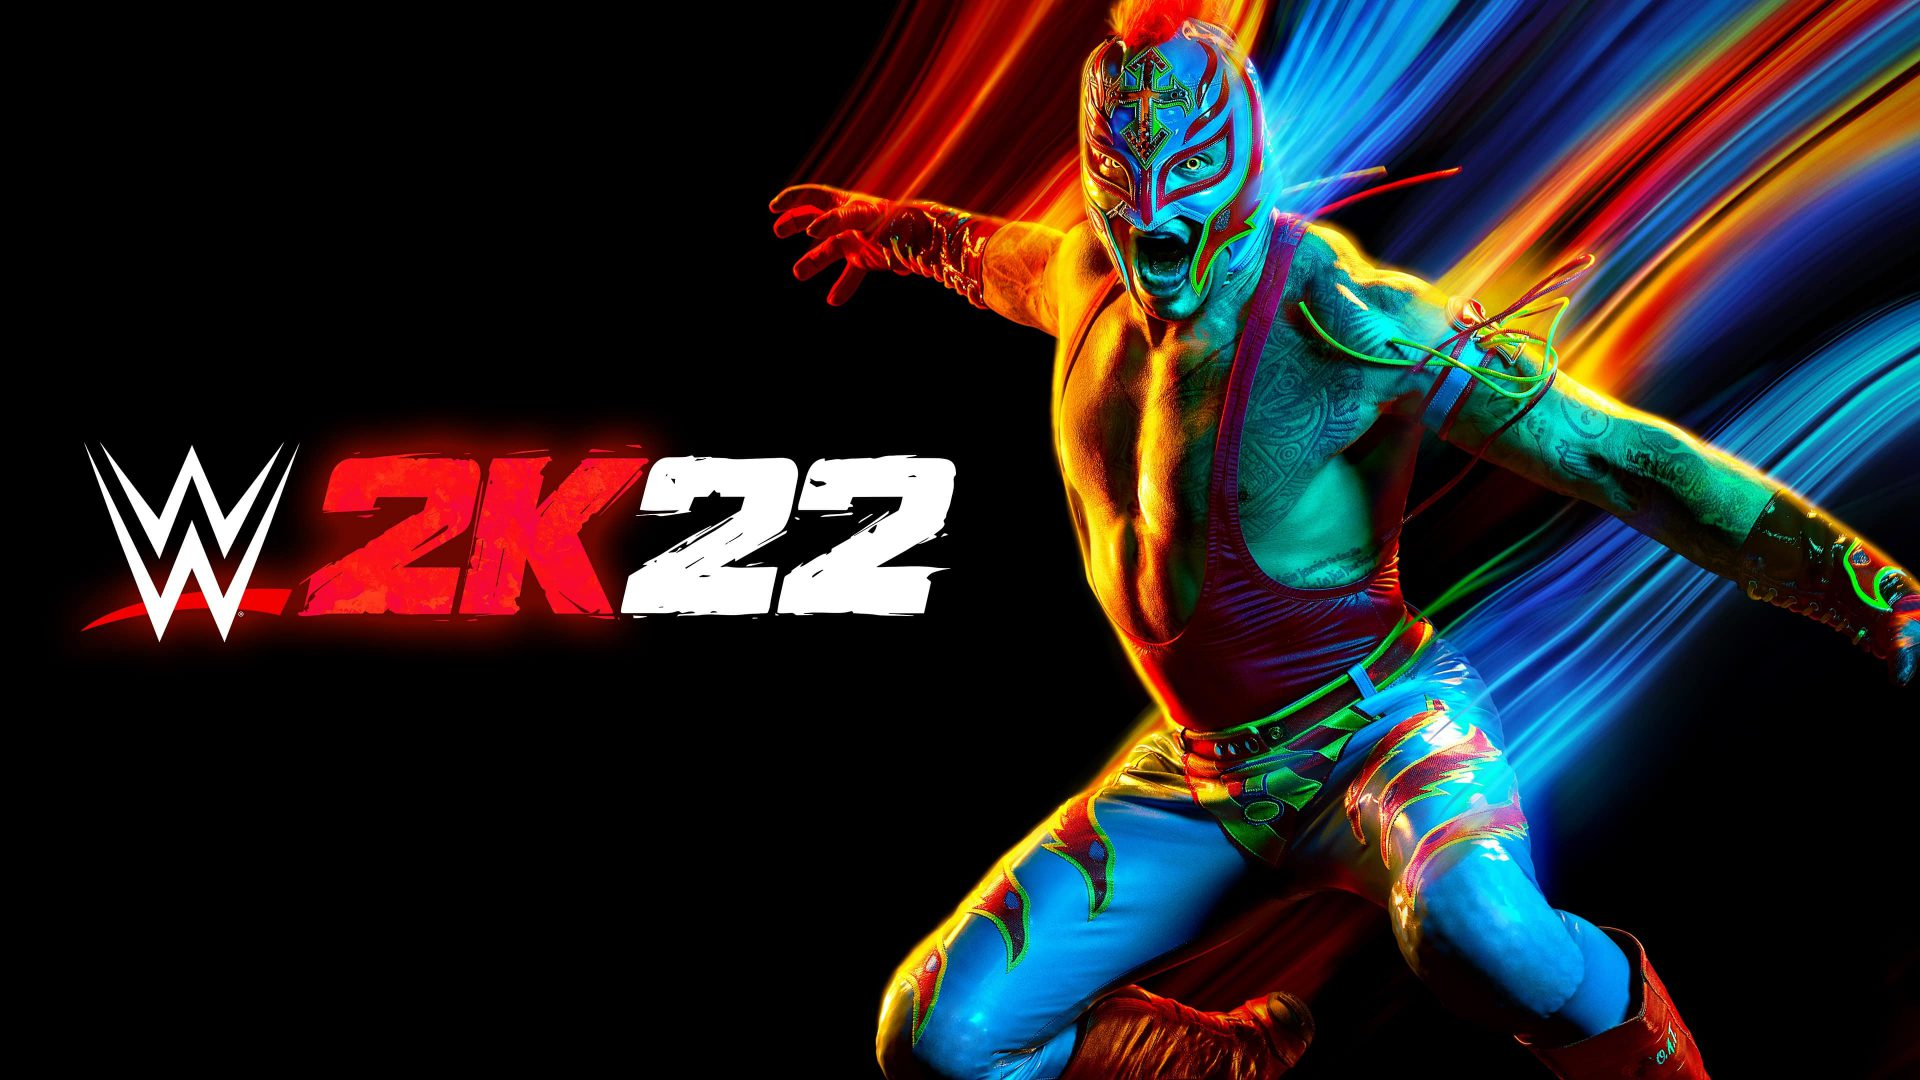 1920x1080 10+ WWE 2K22 HD Wallpapers and Backgrounds